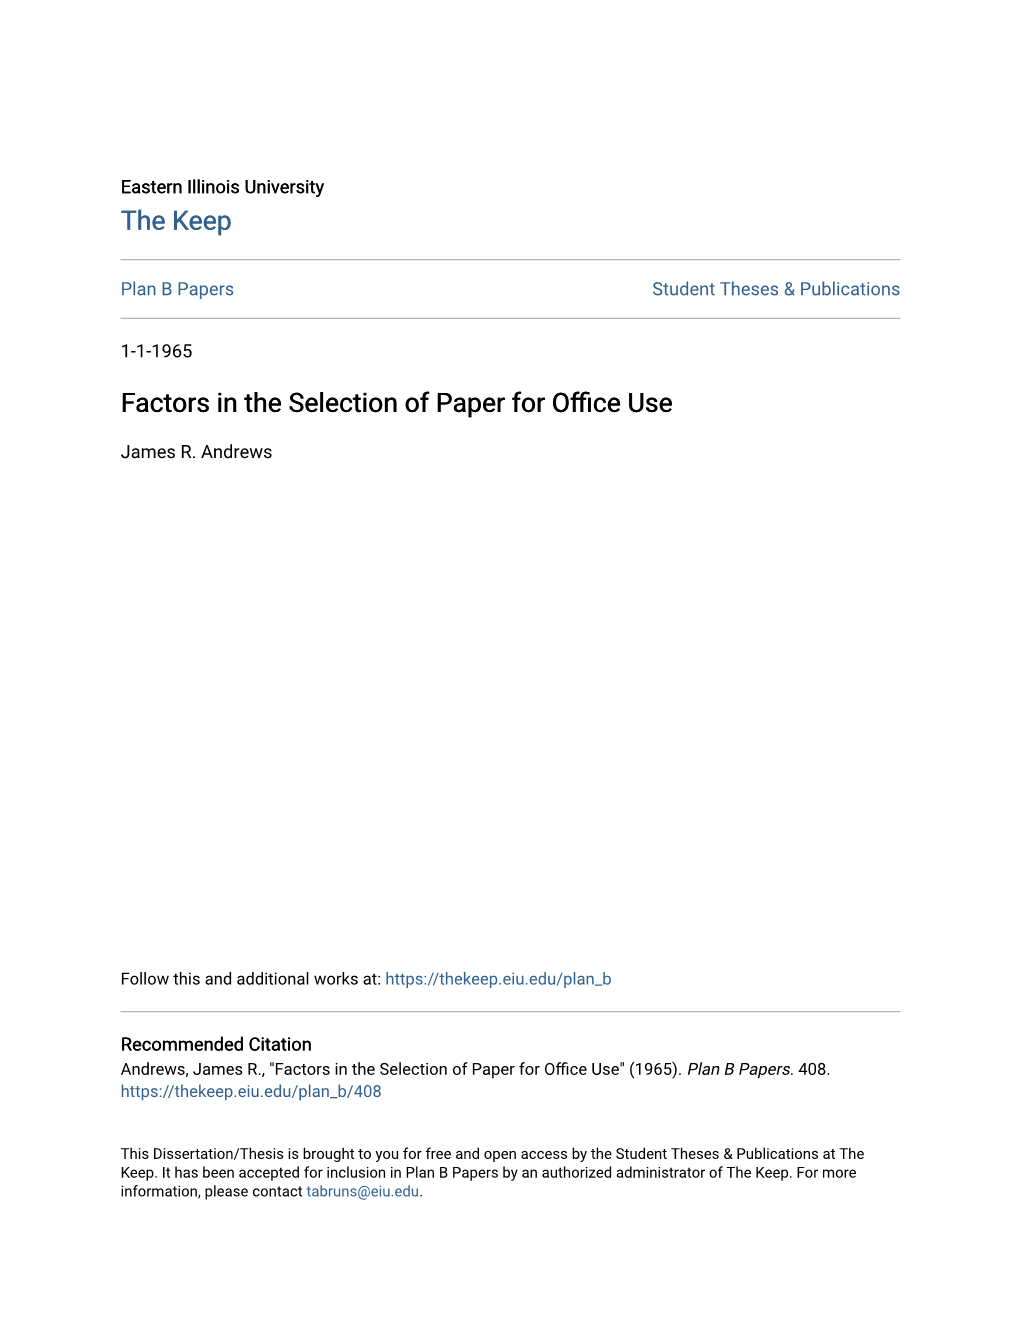 Factors in the Selection of Paper for Office Use